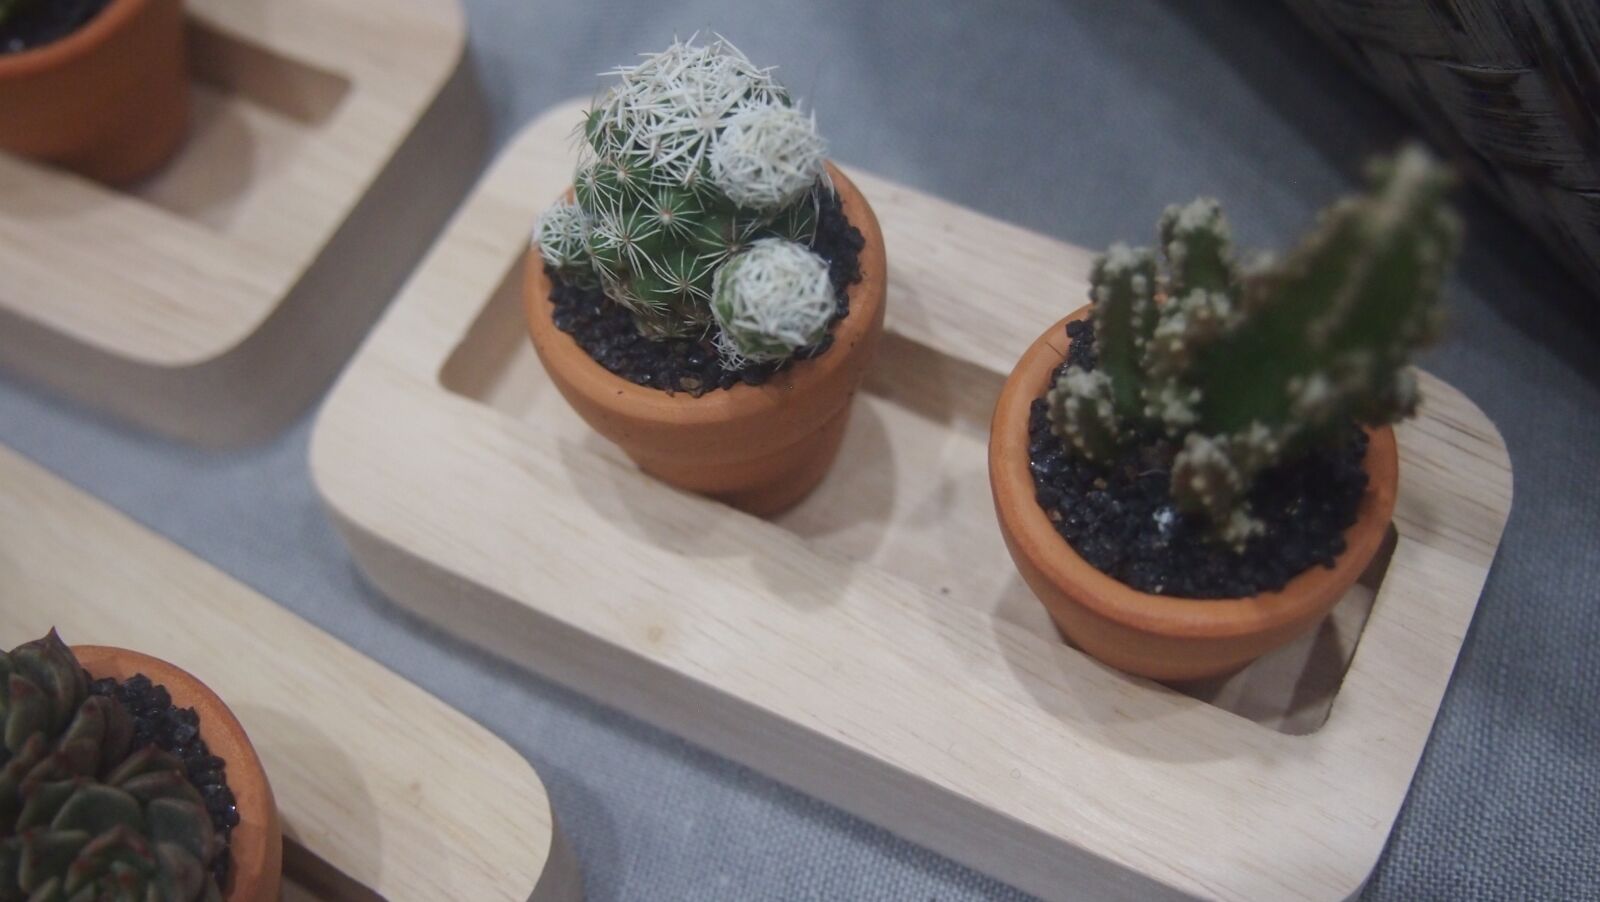 Olympus PEN E-PM1 sample photo. Cactus, potted plant, cactus photography